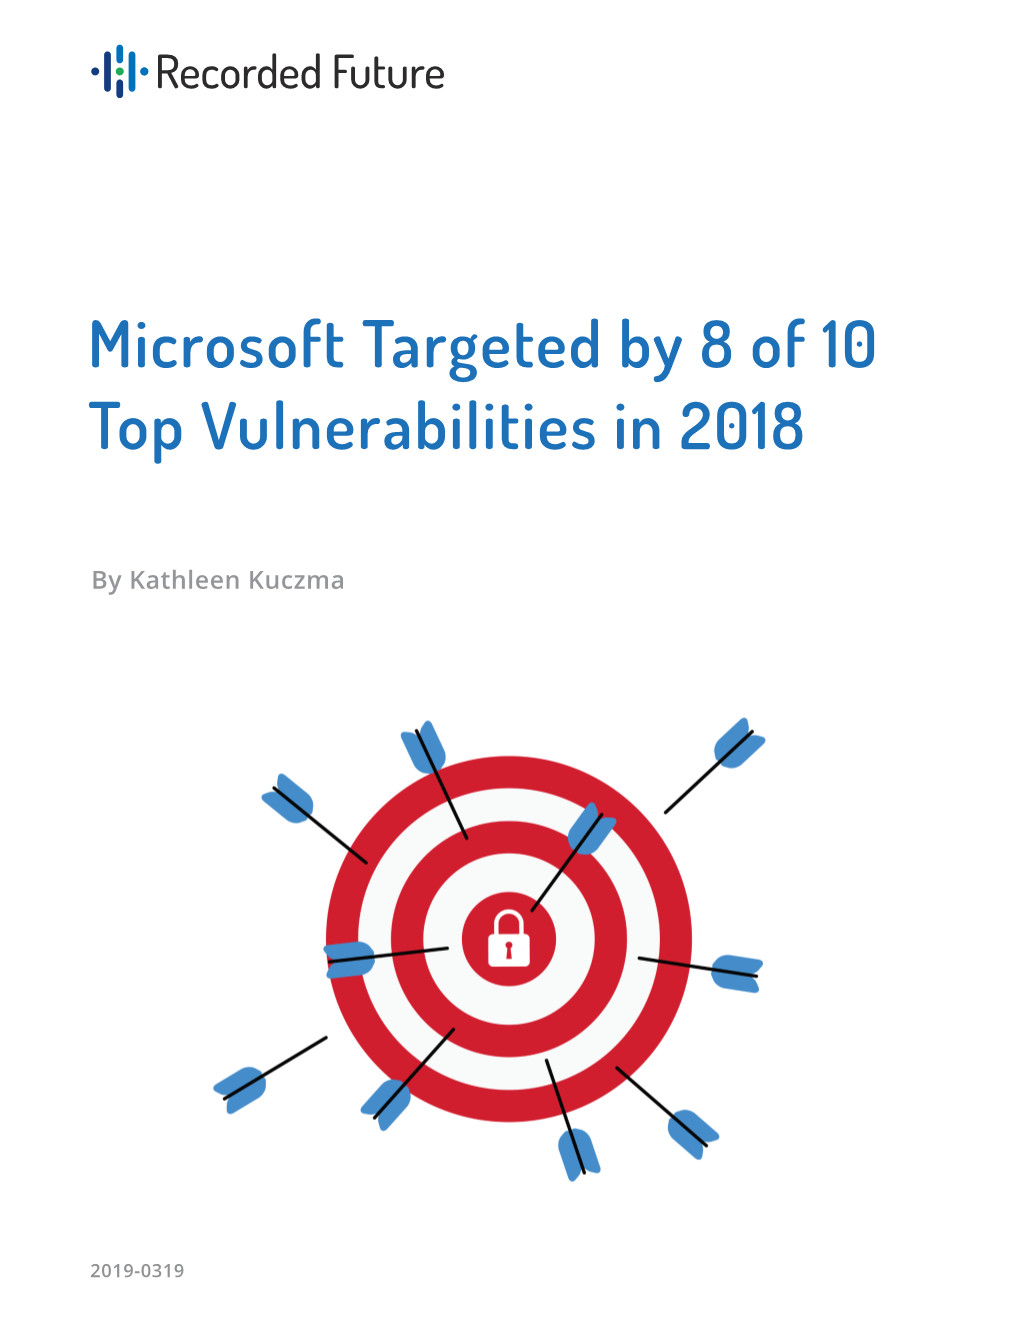 Microsoft Targeted by 8 of 10 Top Vulnerabilities in 2018